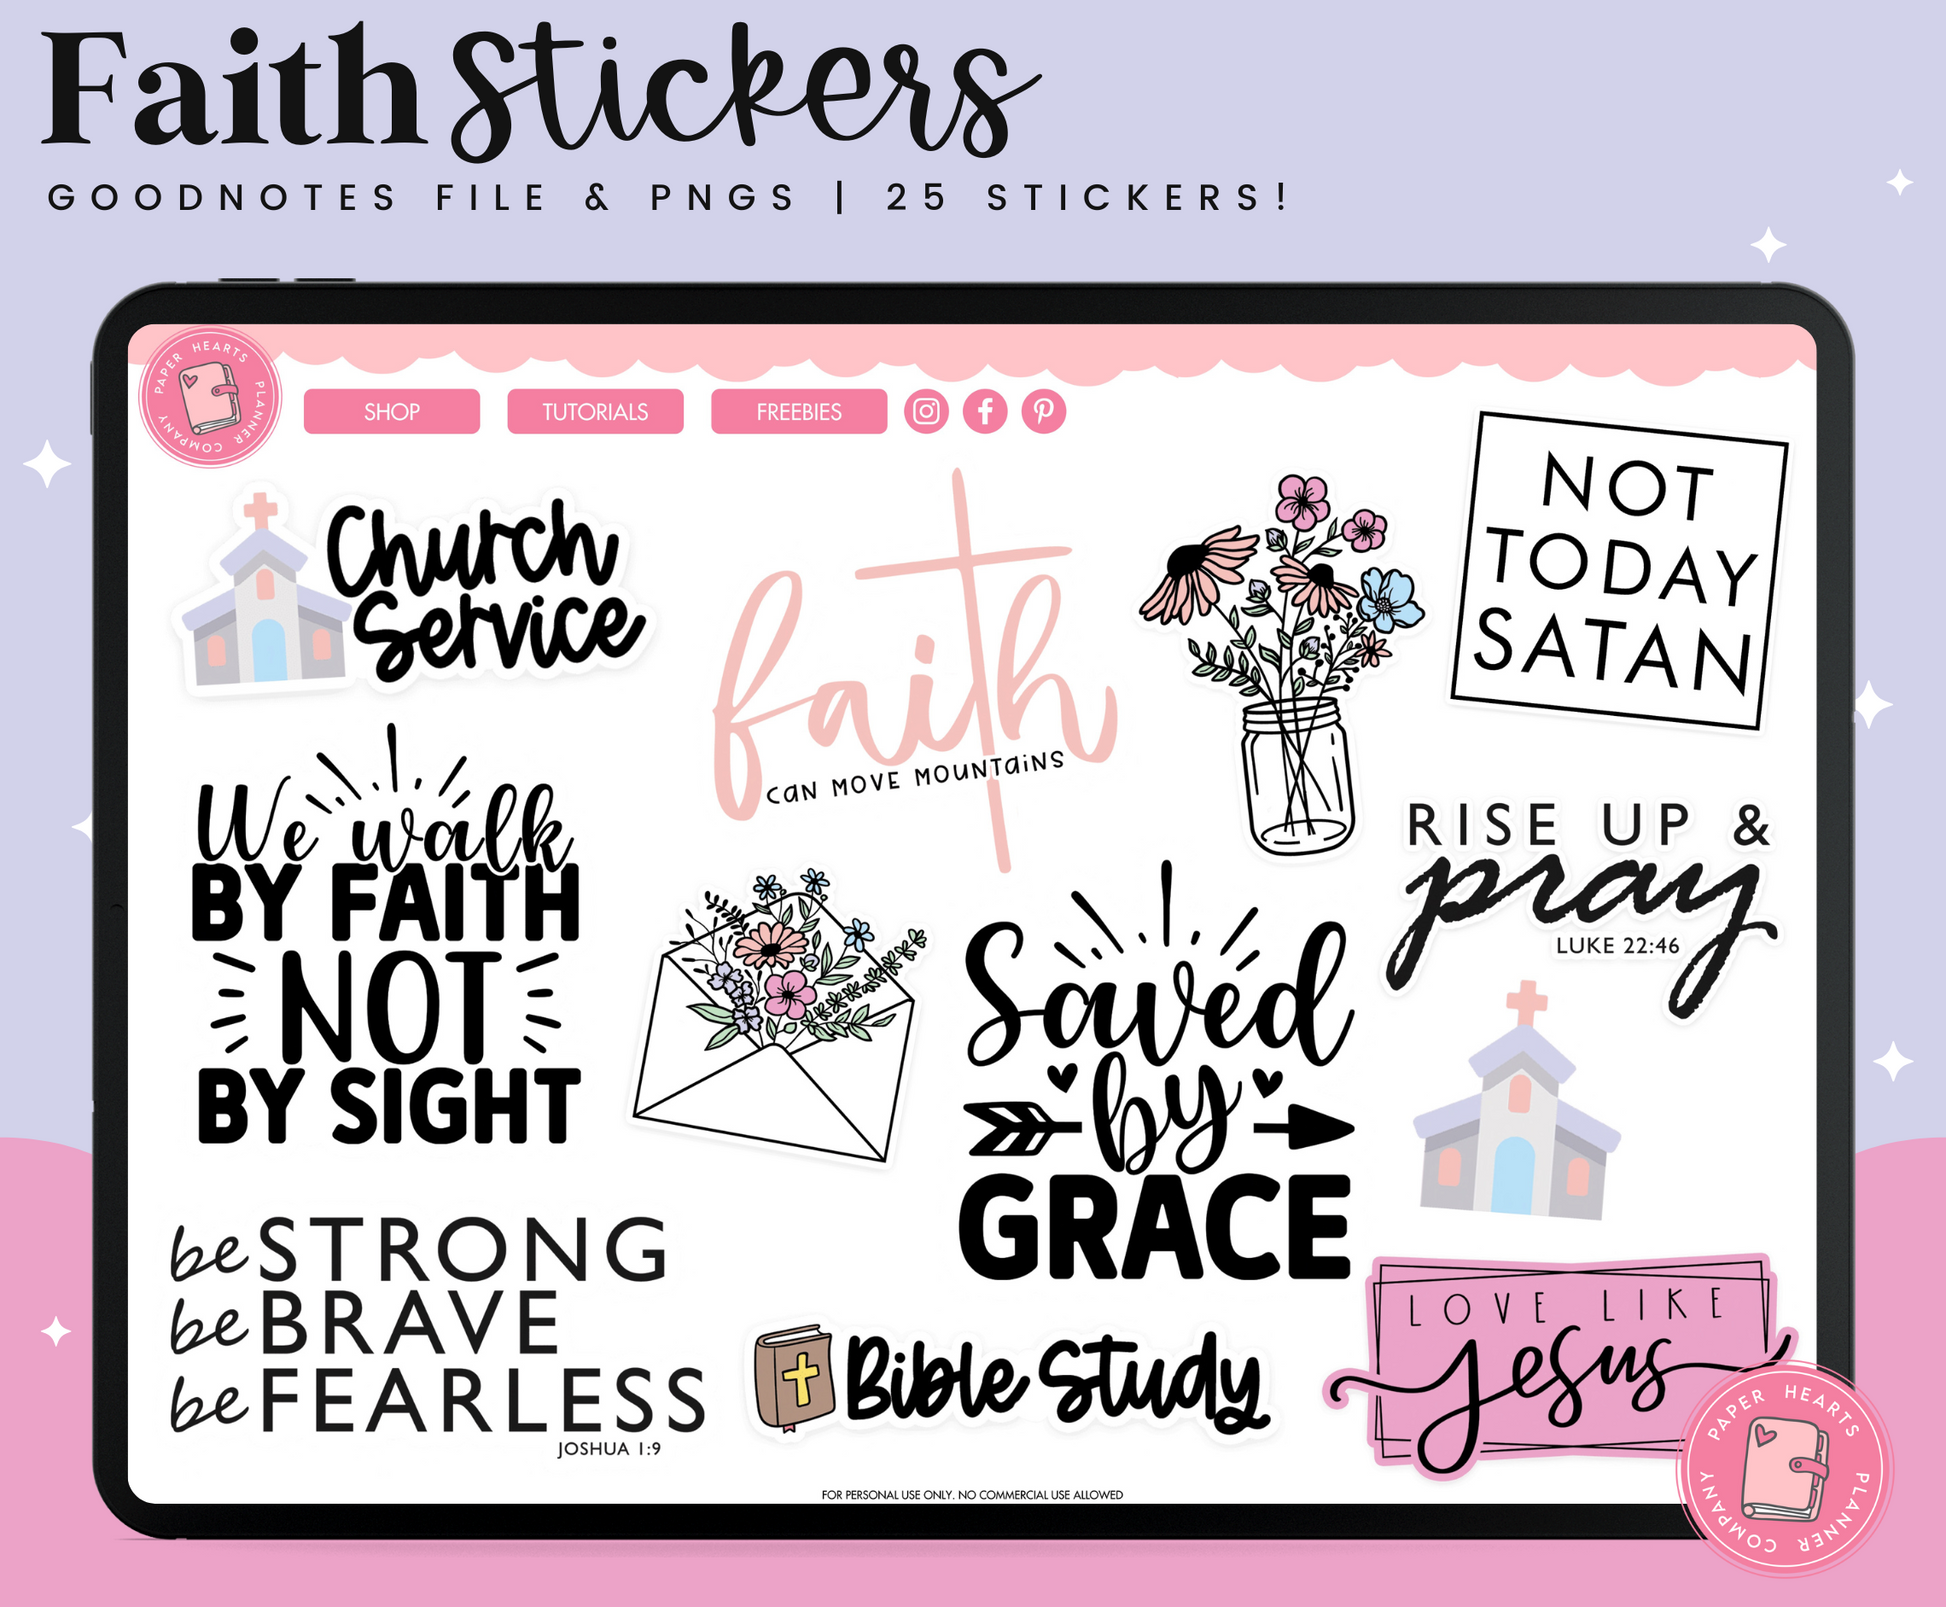 Holy Night Faith Sticker Sheets, Christian Planner Stickers